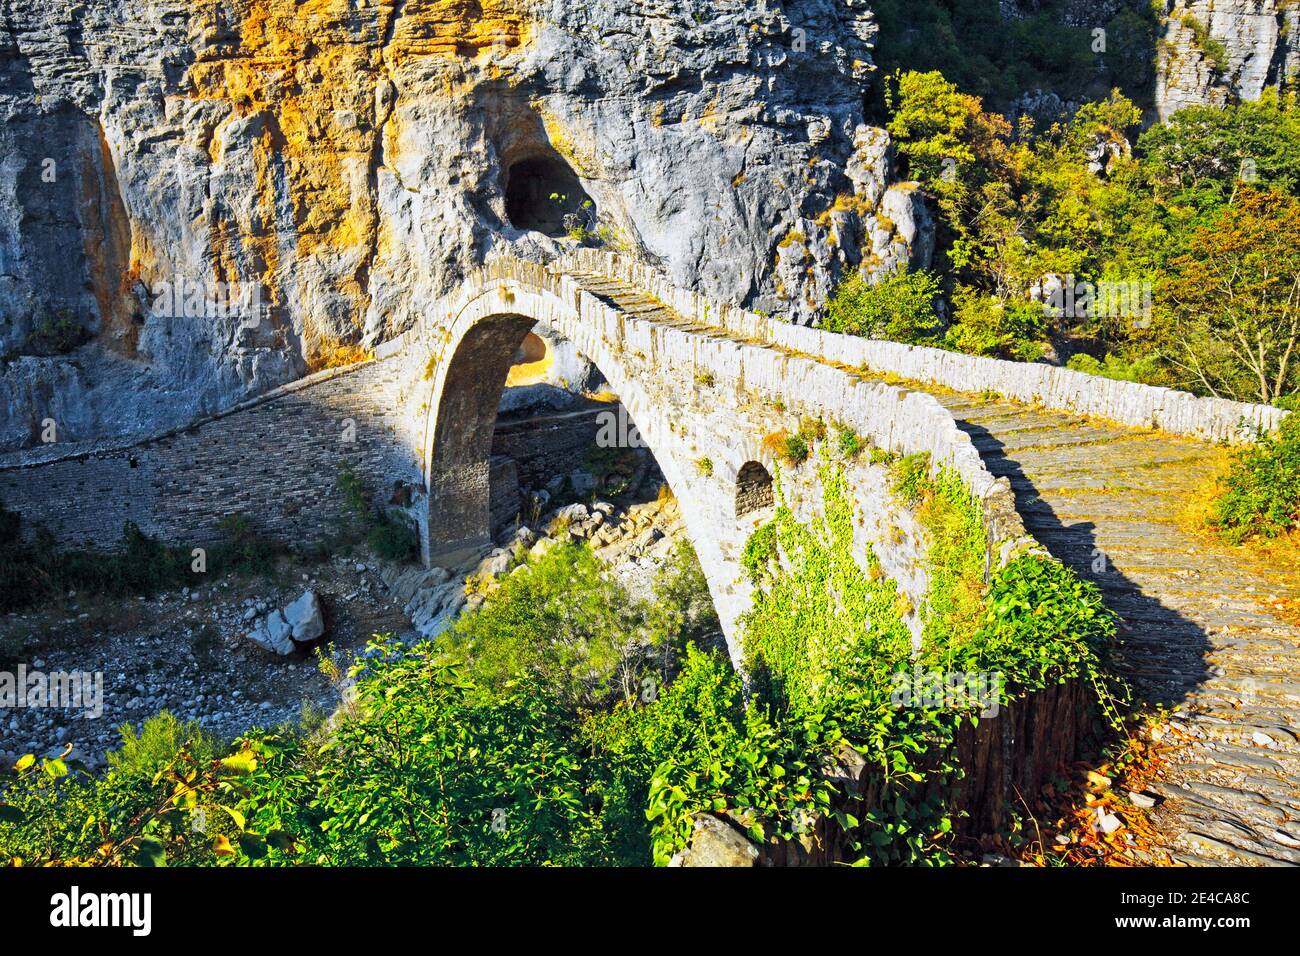 The single-arch Kokkoris stone bridge was built in 1750, it spans a narrow brook valley between two steep walls, mountainous region of Epirus, northern Greece Stock Photo